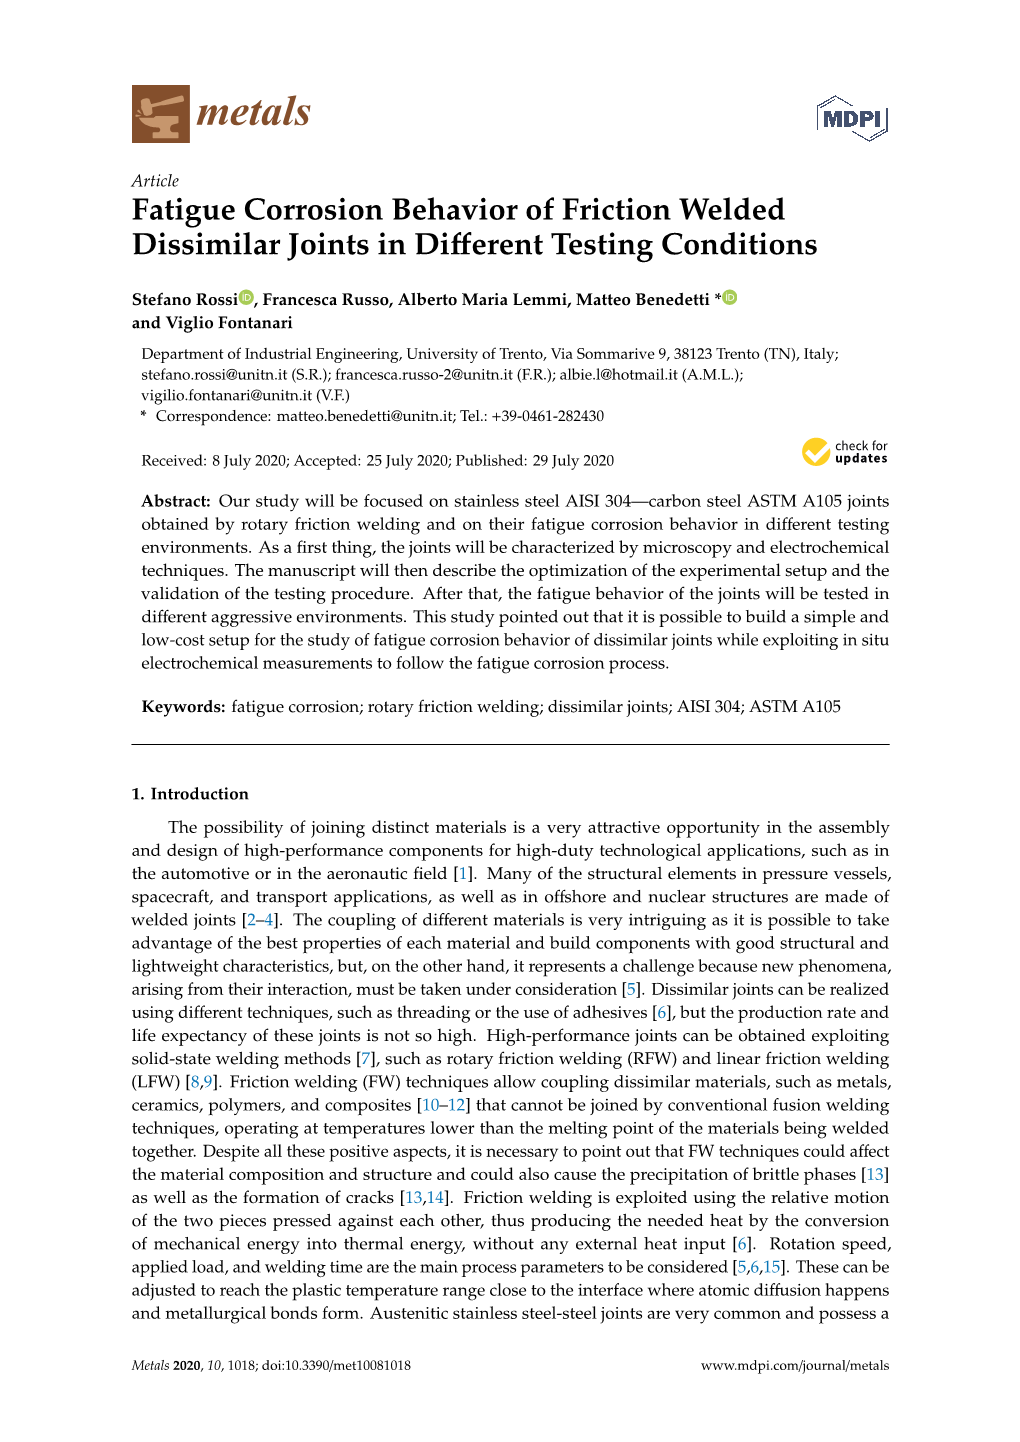 Fatigue Corrosion Behavior of Friction Welded Dissimilar Joints in Diﬀerent Testing Conditions